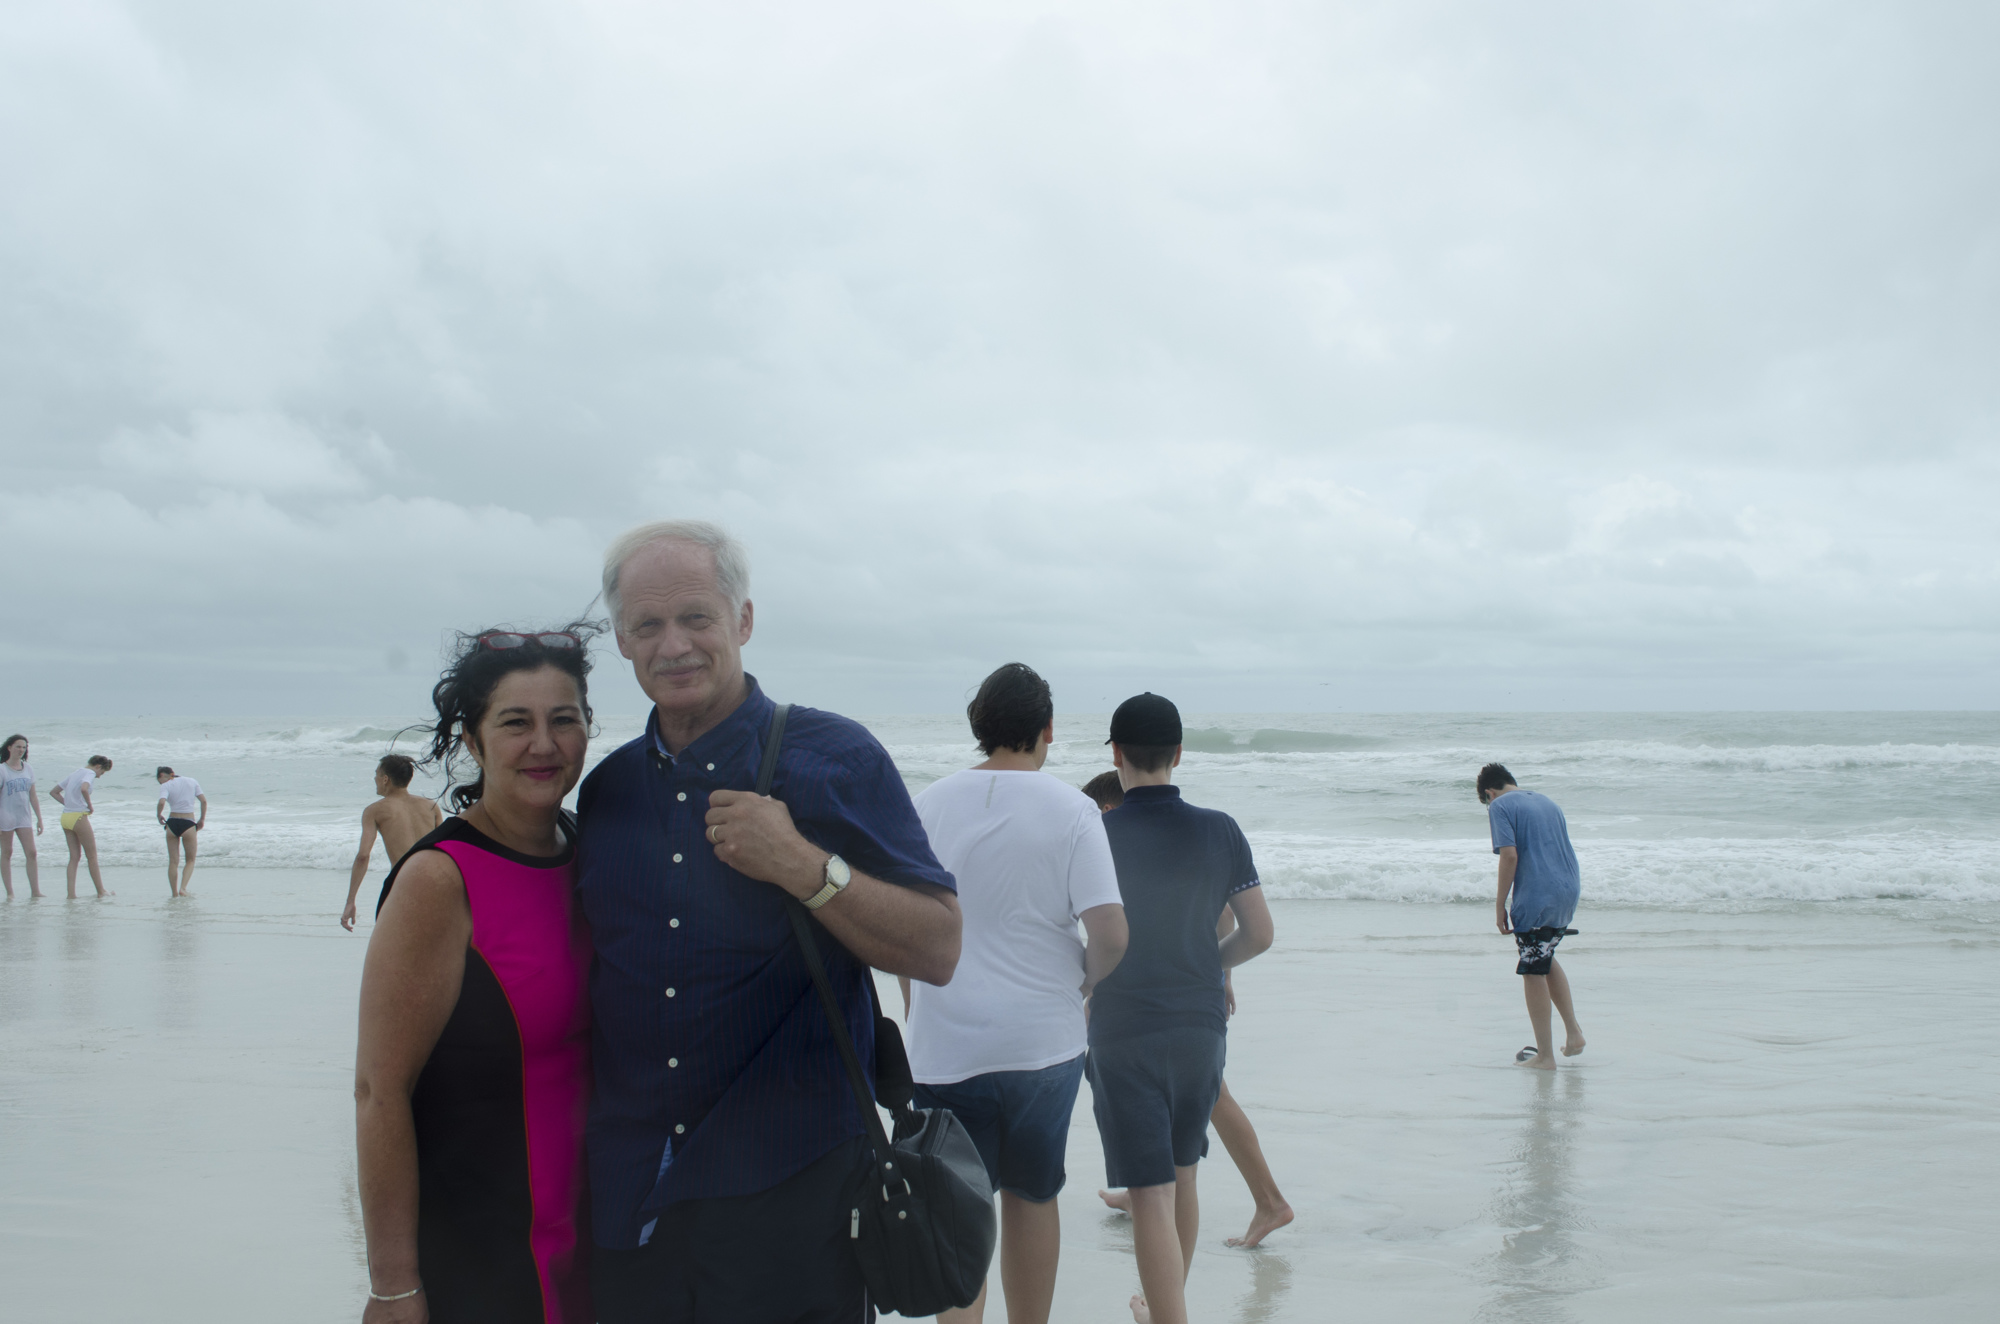 Christine and Peter Czarmikau arrived in Siesta Key July 31, bringing with them about 50 teenagers. The storm didn't stop them from checking out the beach right away.